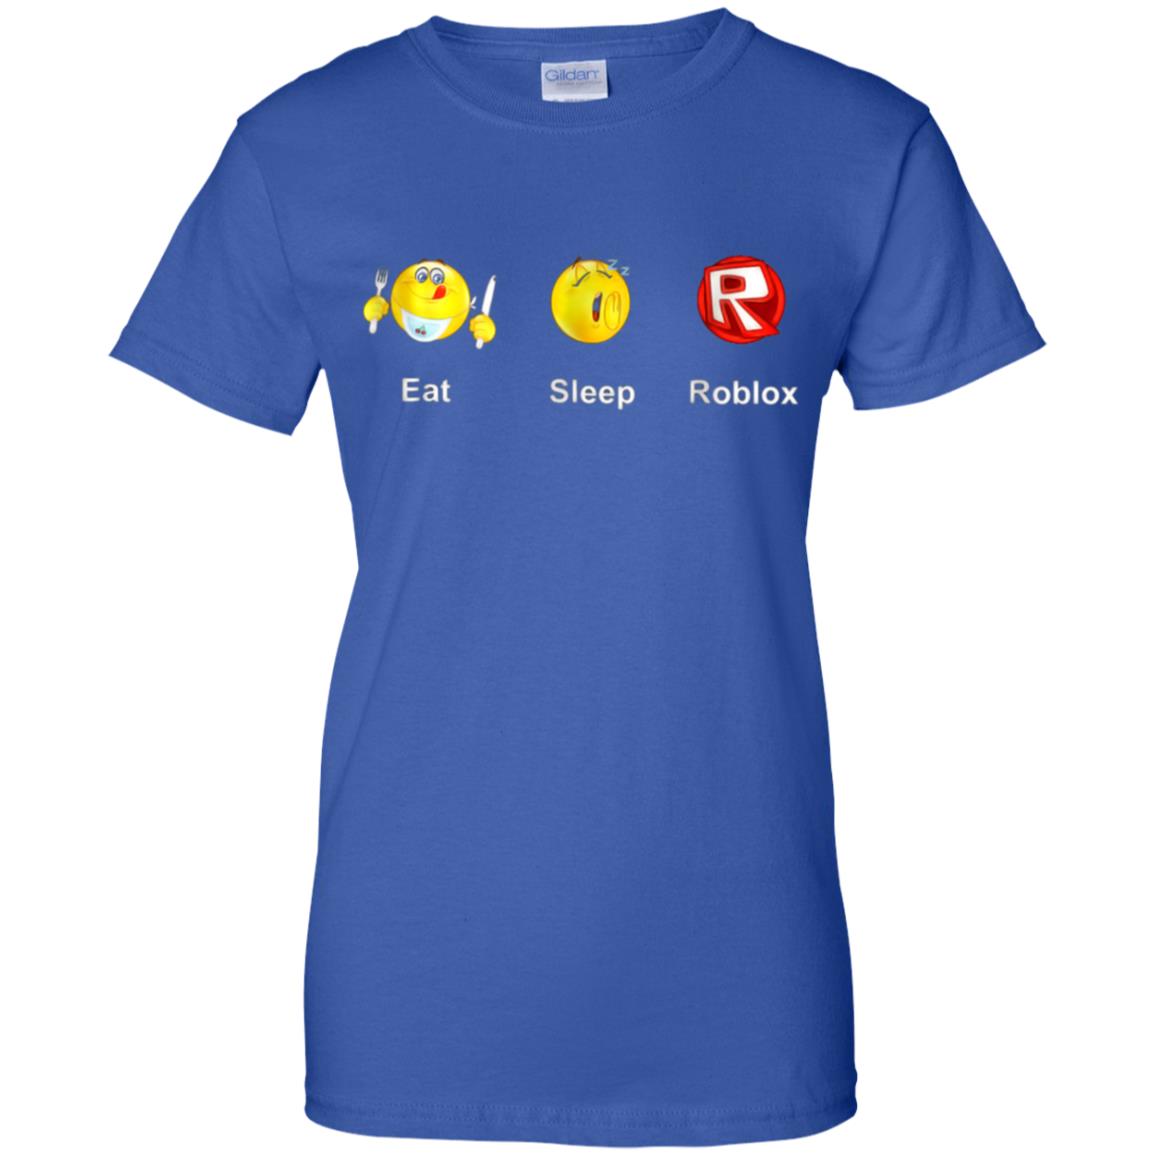 Awesome Eat Sleep Roblox Gift T Shirt 99promocode - roblox 4th of july shirt